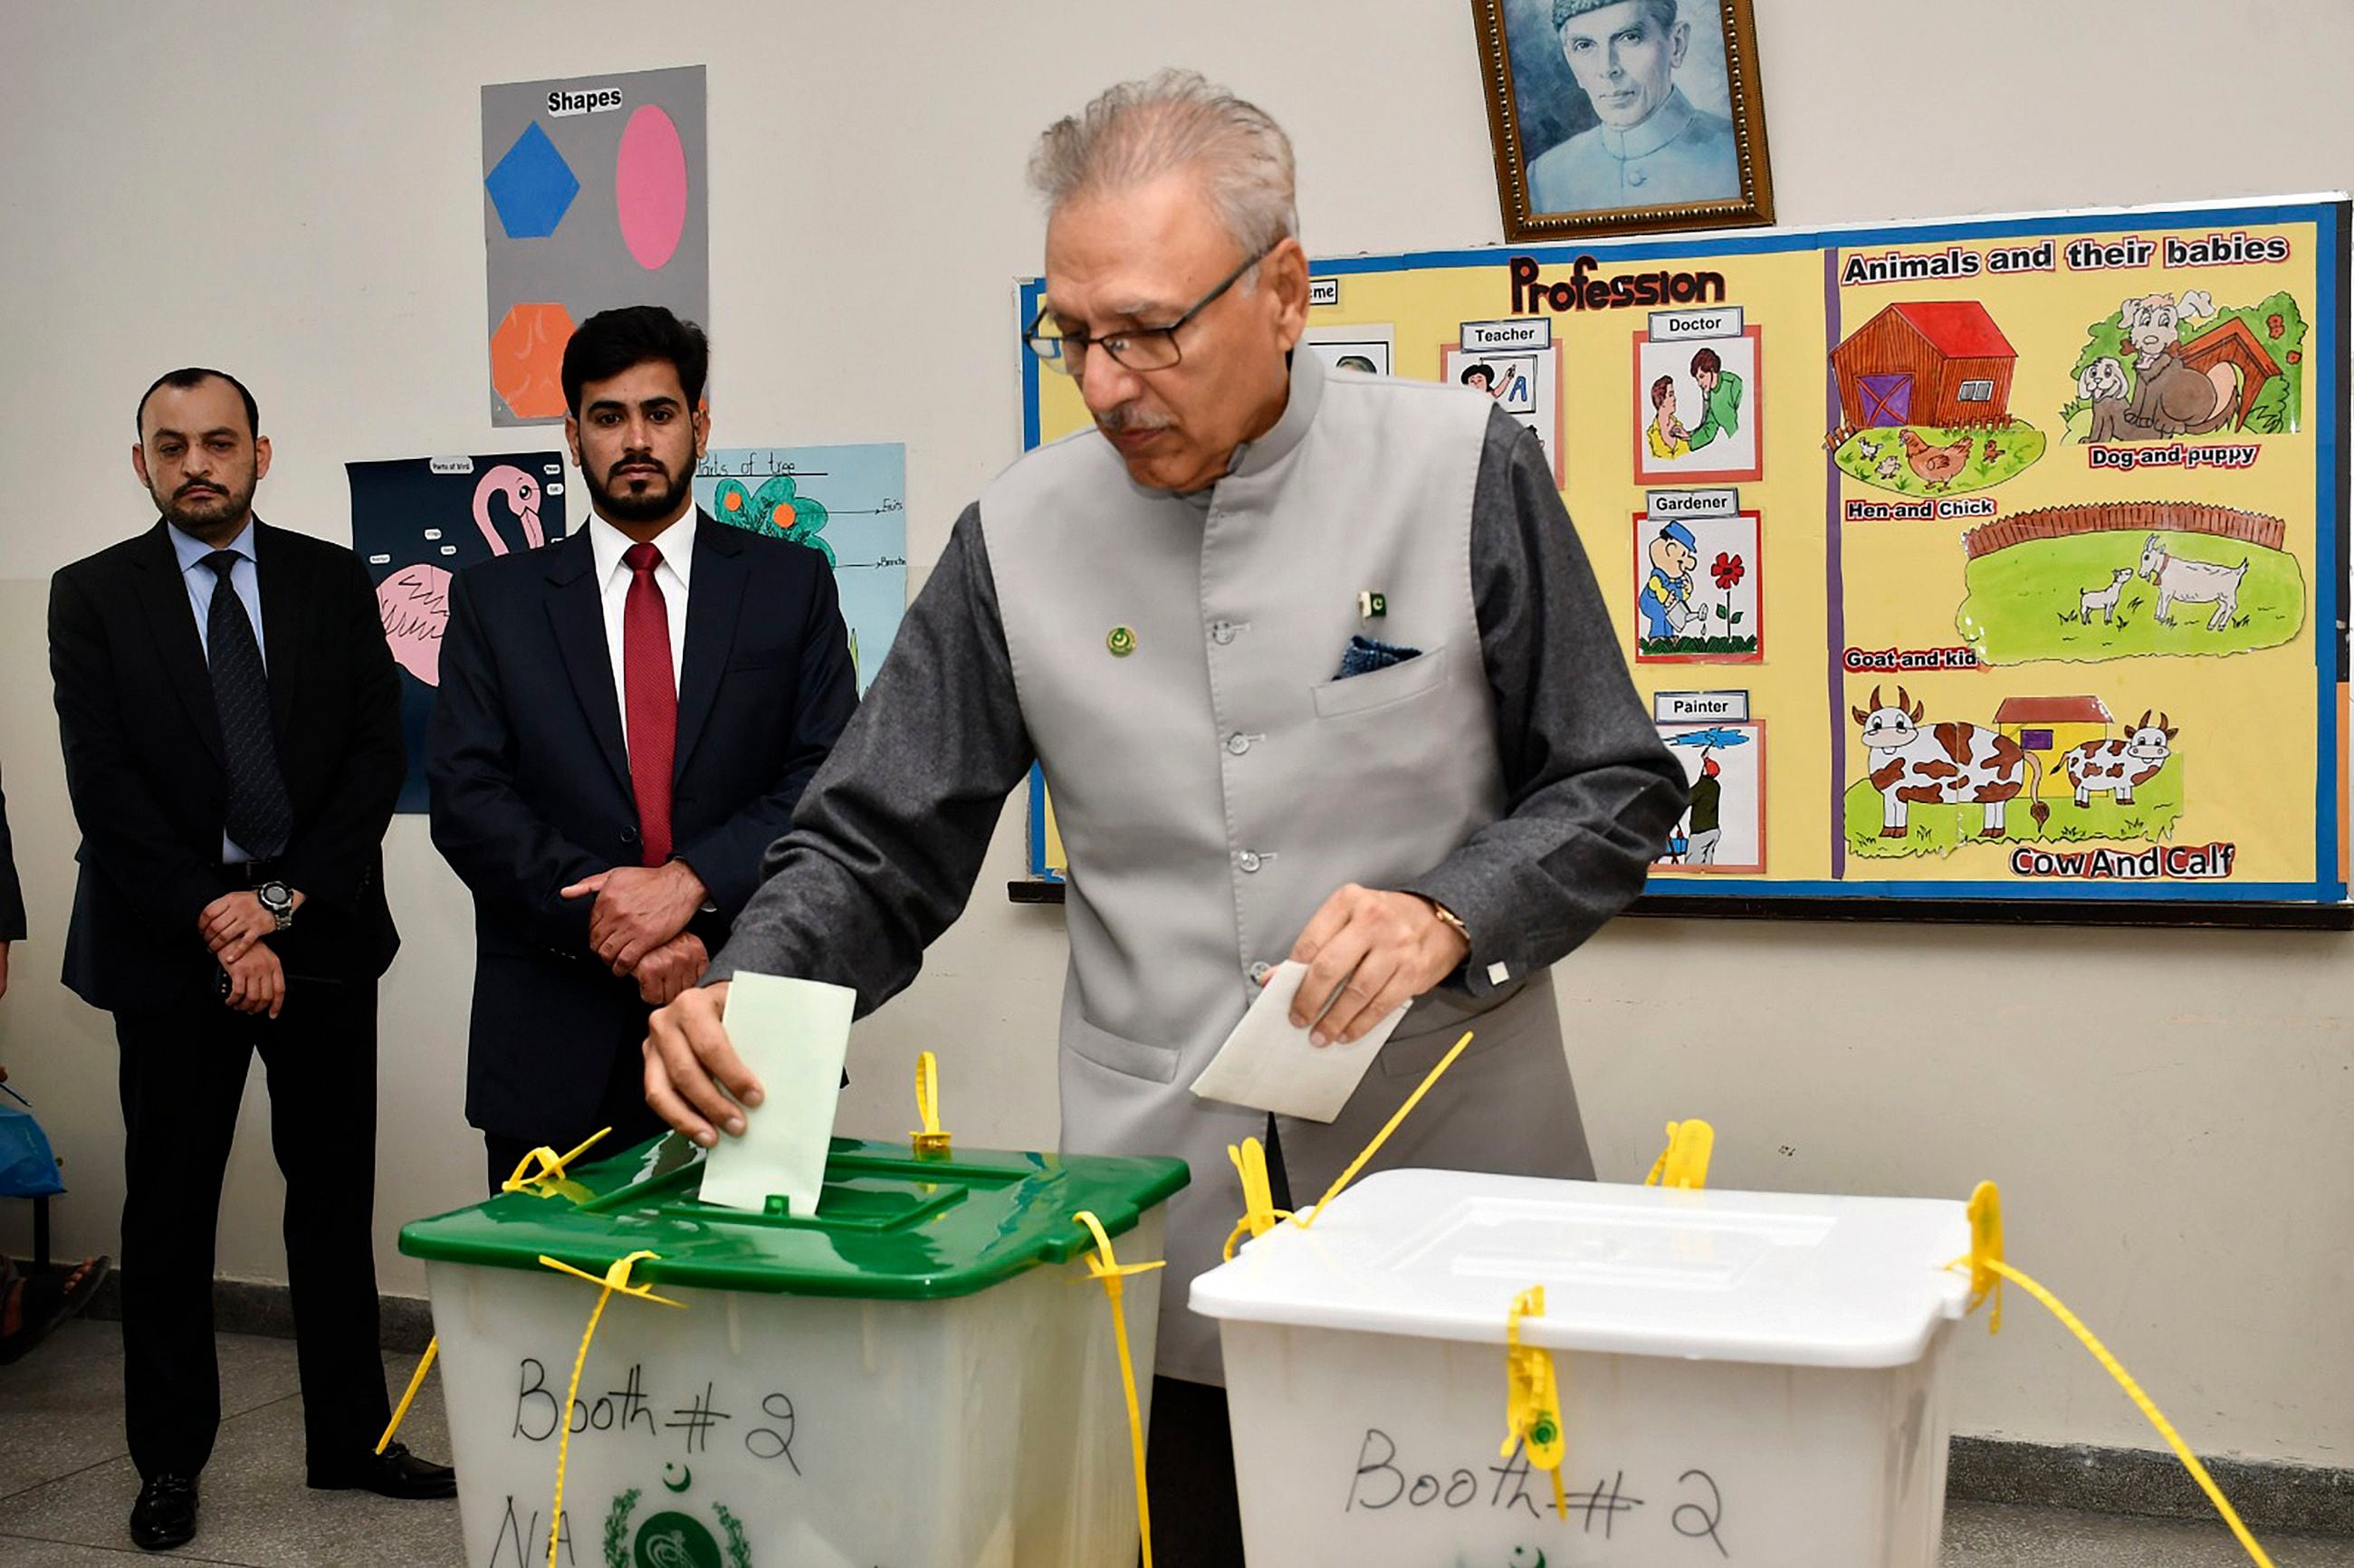 pakistan's army chief calls for unity after inconclusive election